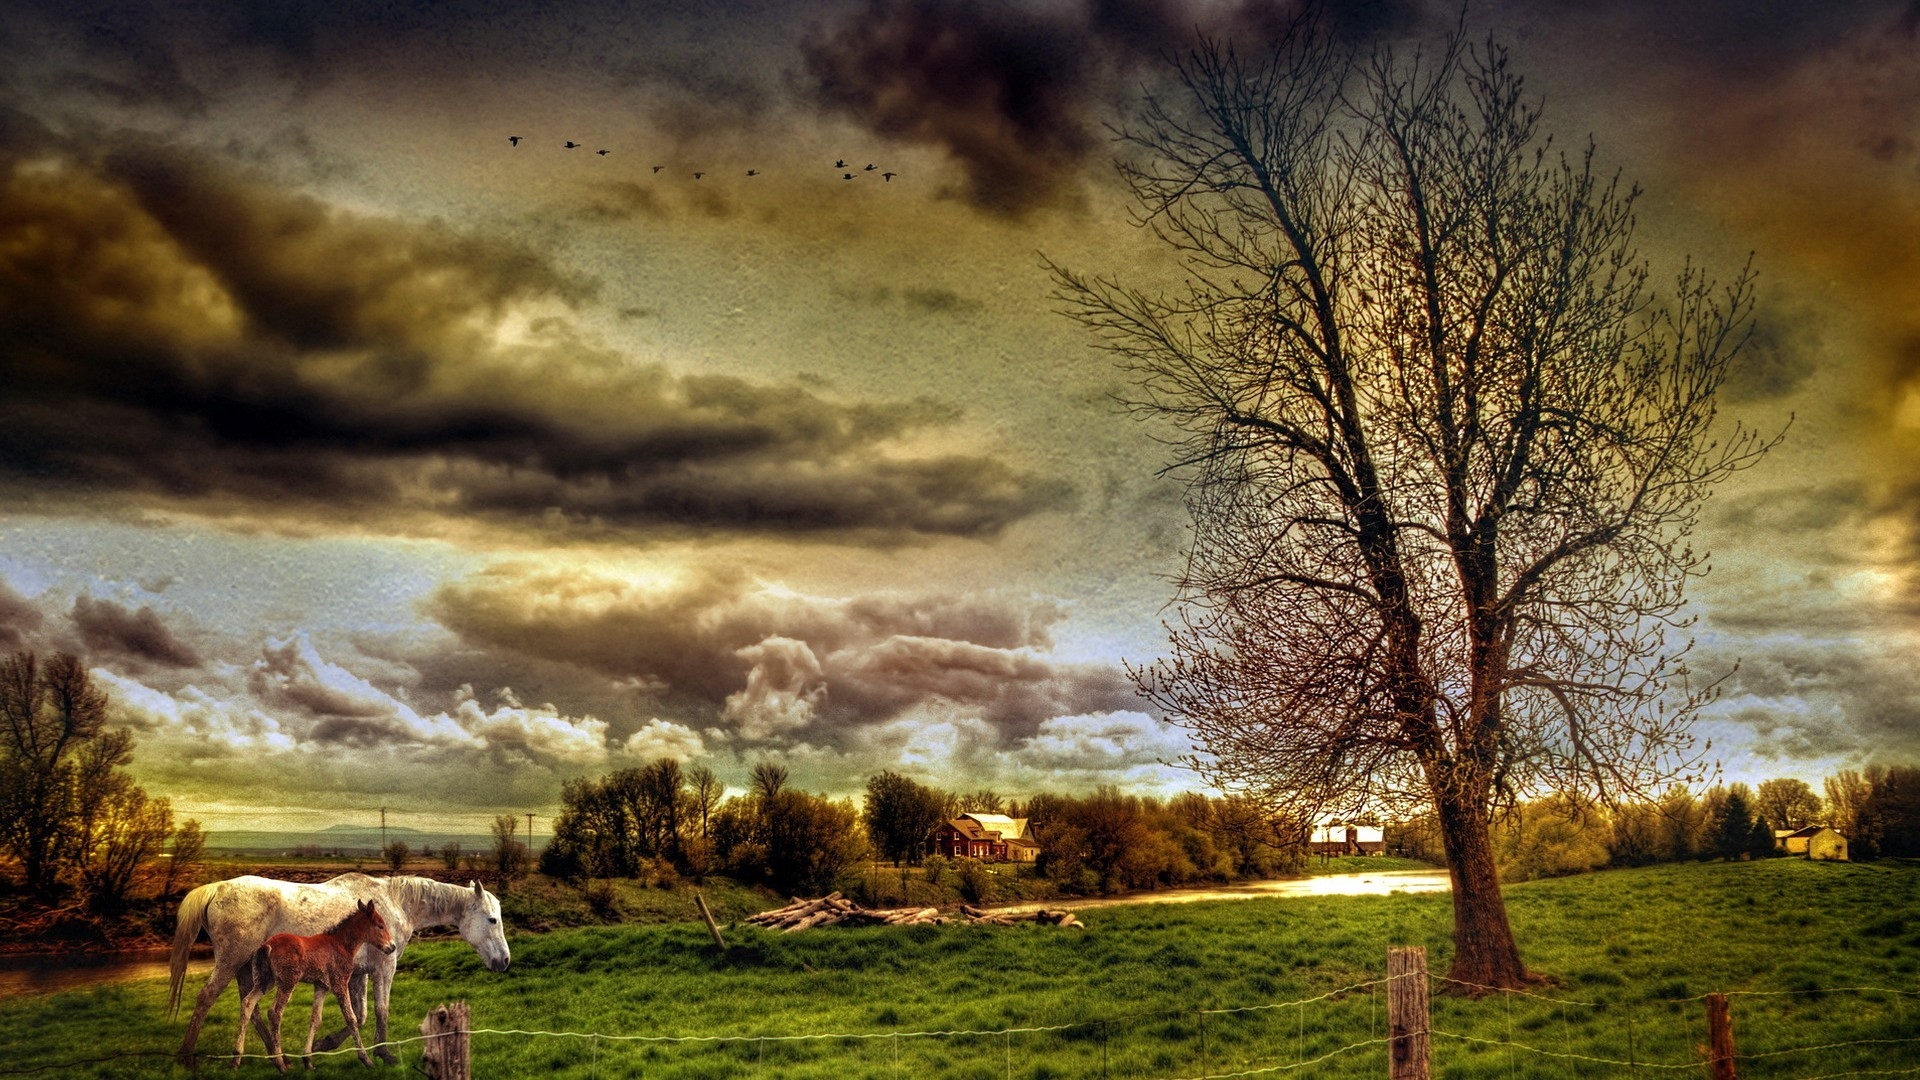 HDR Countryside Landscape for 1920 x 1080 HDTV 1080p resolution